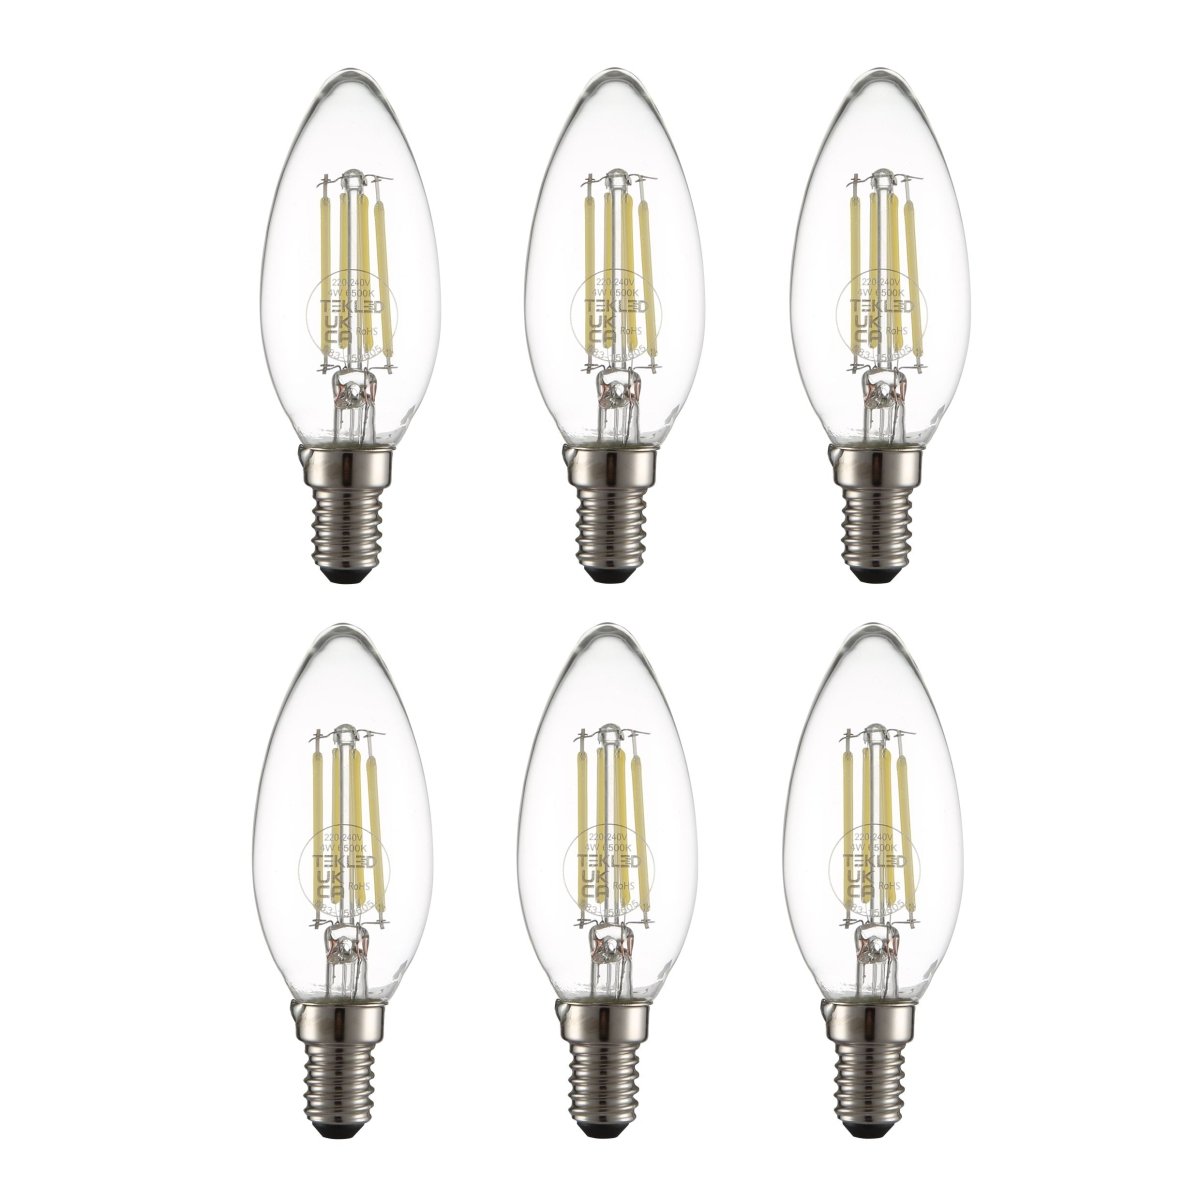 Main image of LED Filament Bulb C35 Candle E14 Small Edison Screw 4W 470lm Cool Daylight 6500K Clear Pack of 6 | TEKLED 583-150605